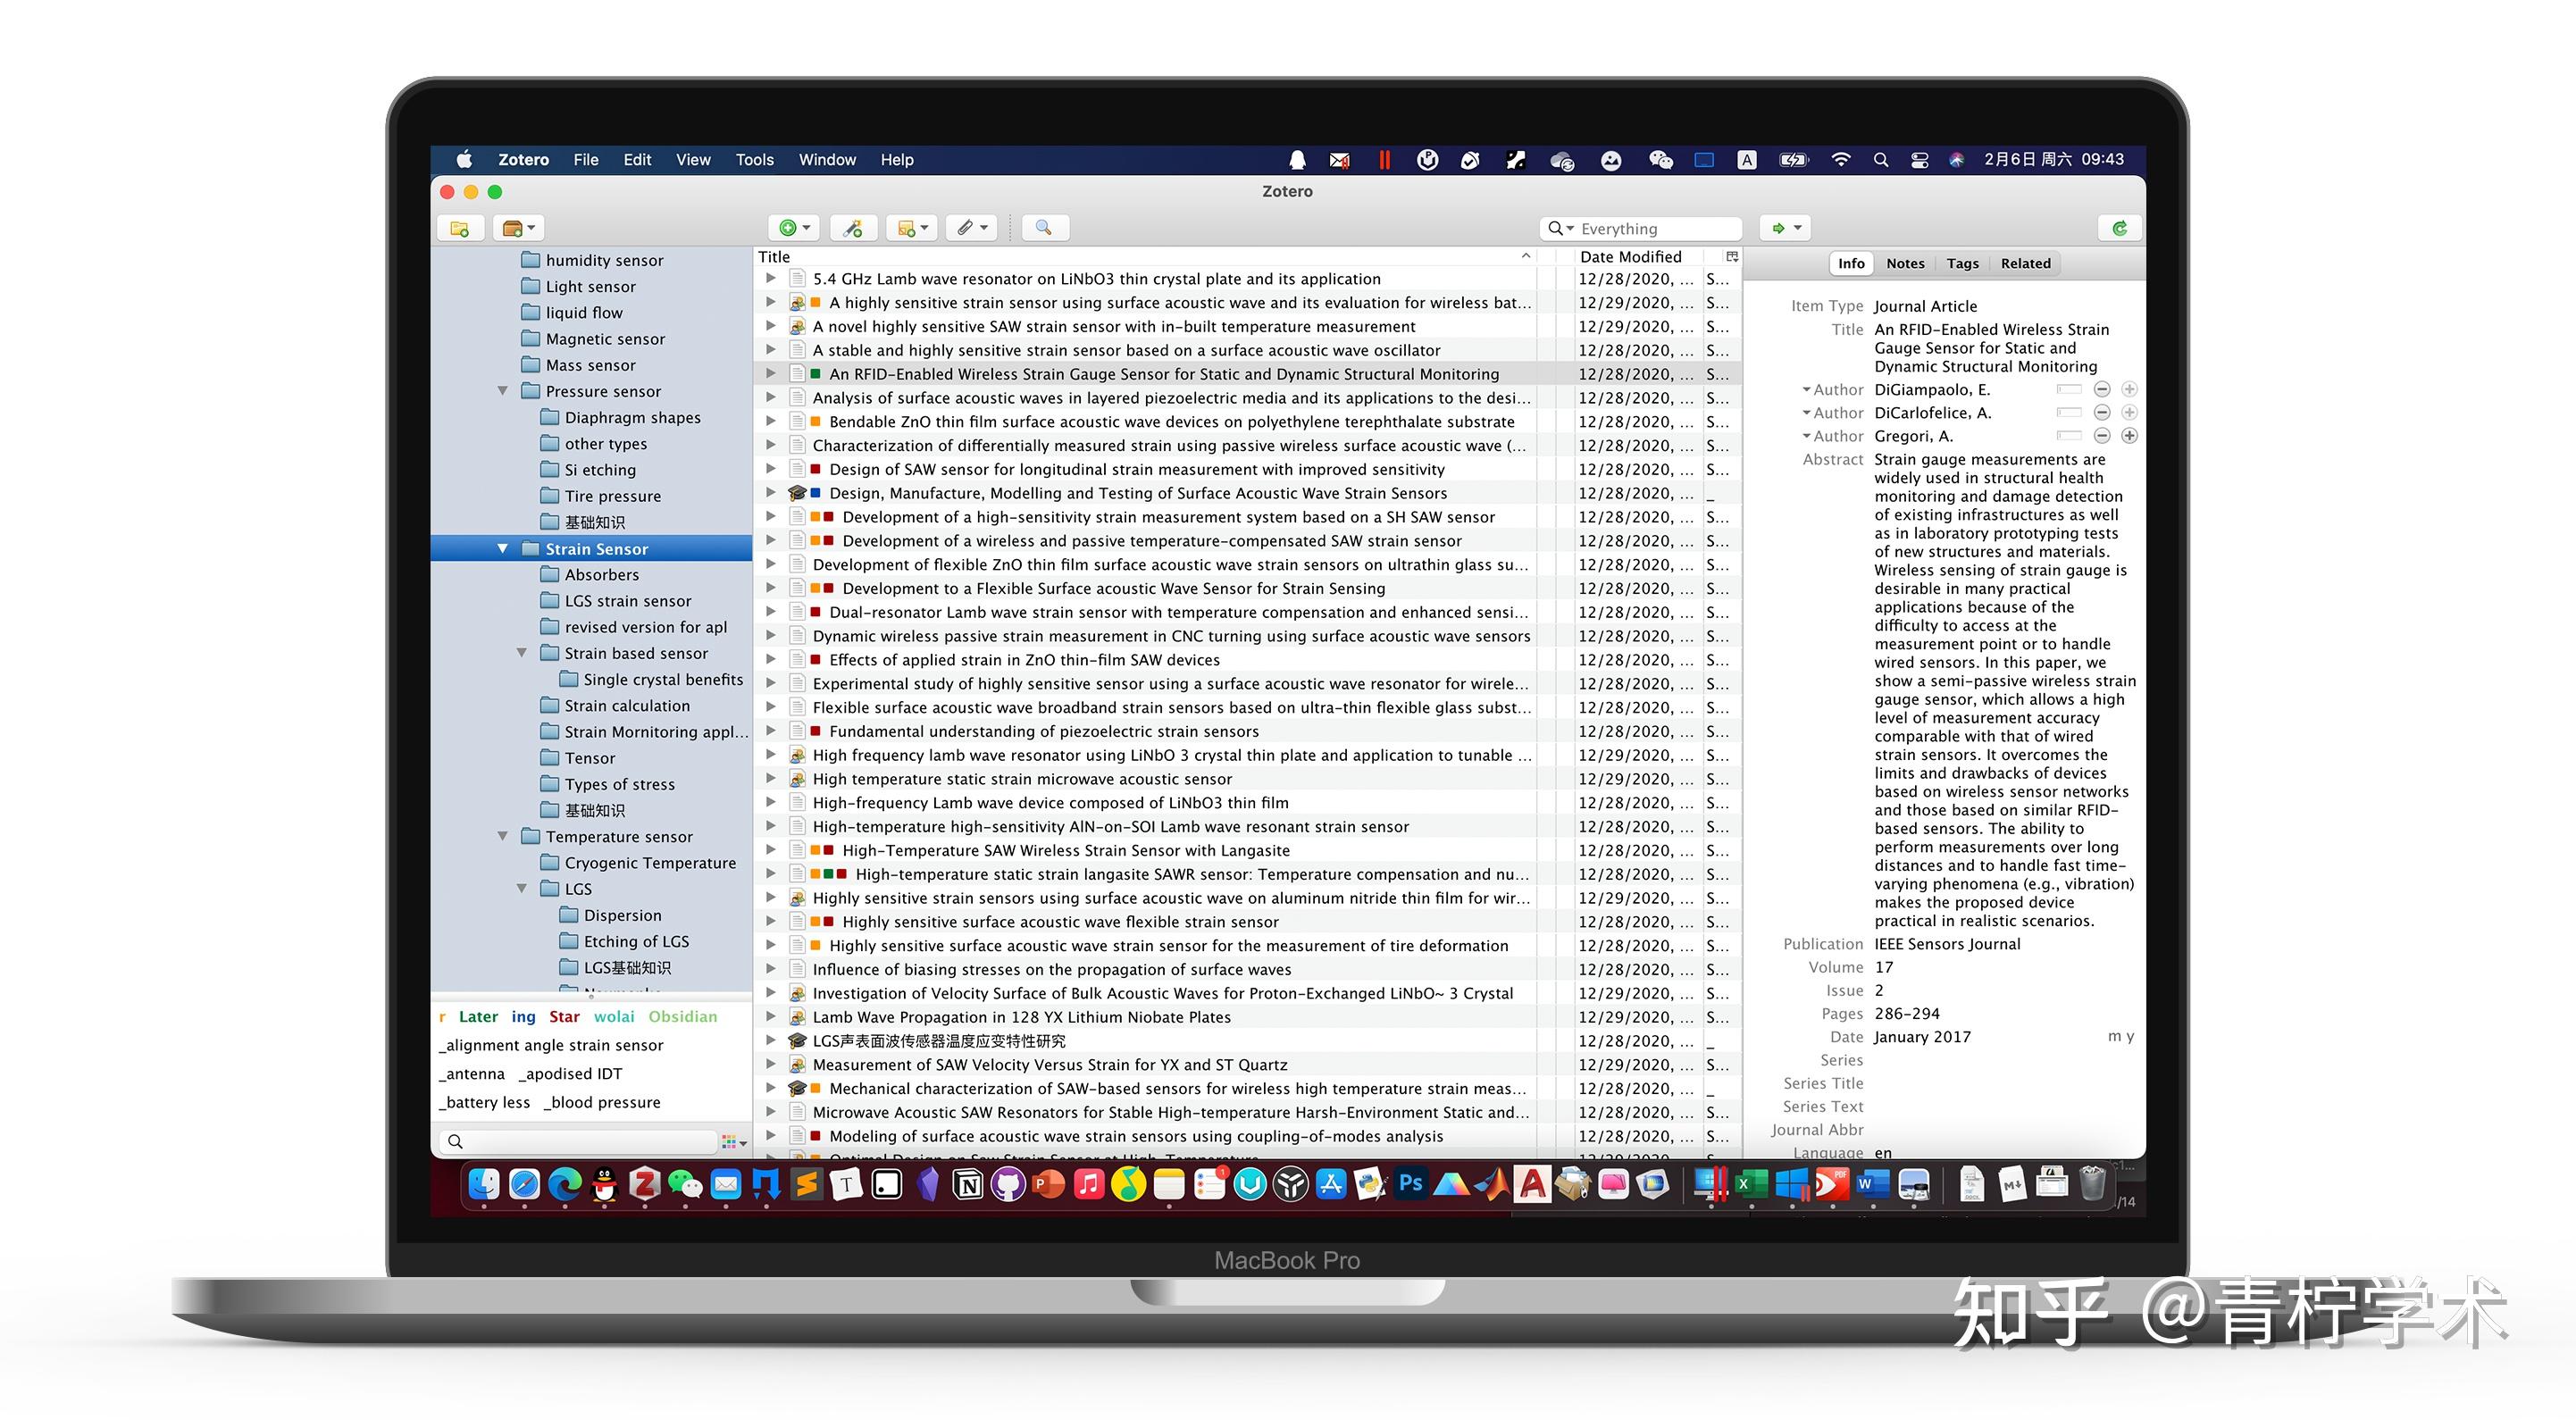 download the new version for apple Zotero 6.0.27